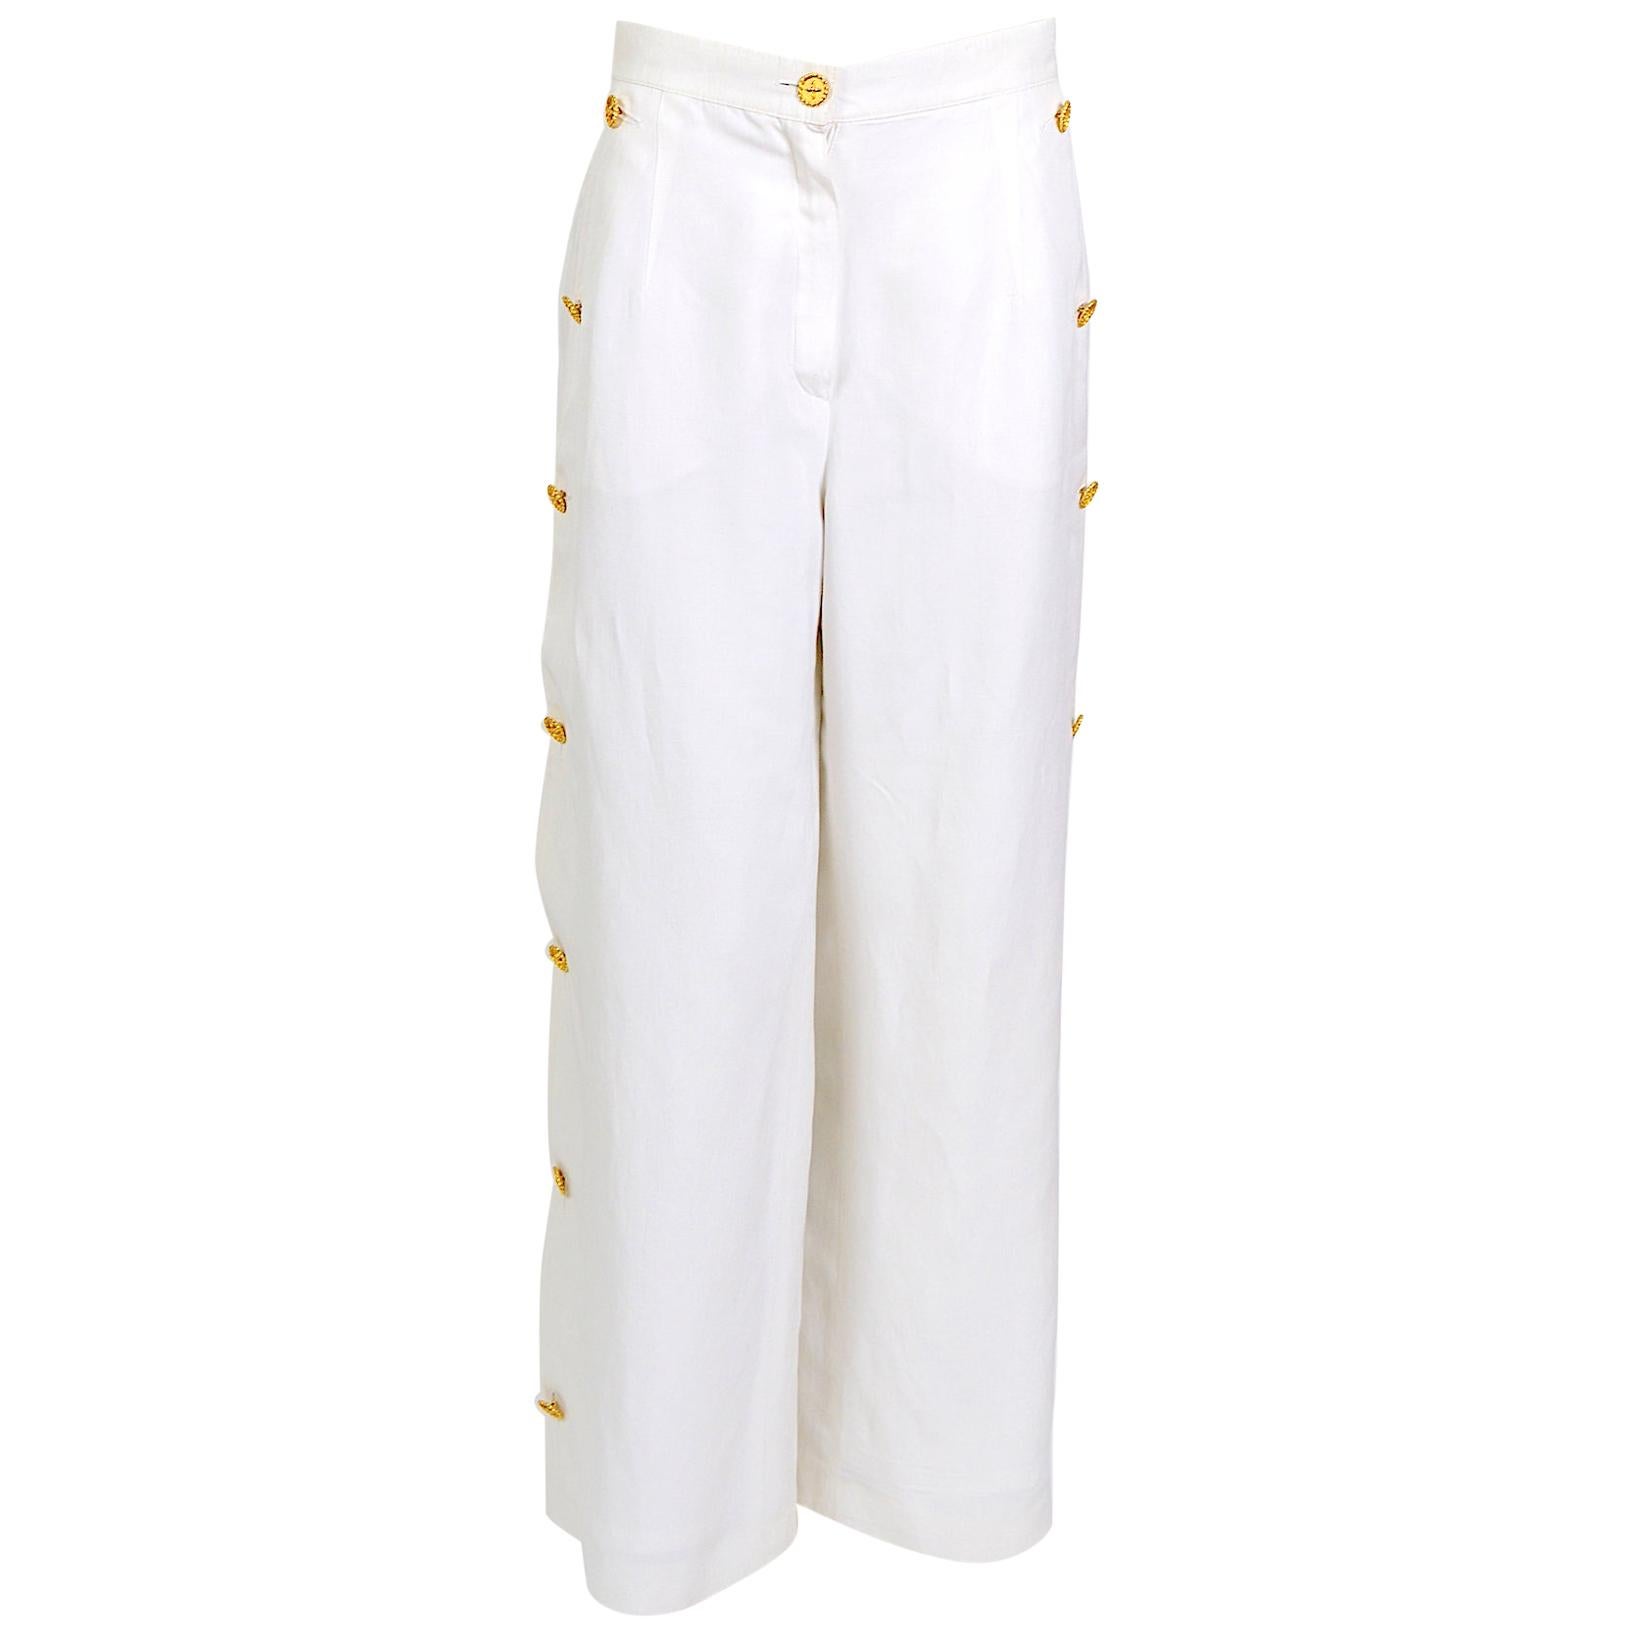 Louis Feraud vintage white linen and gold buttons trousers